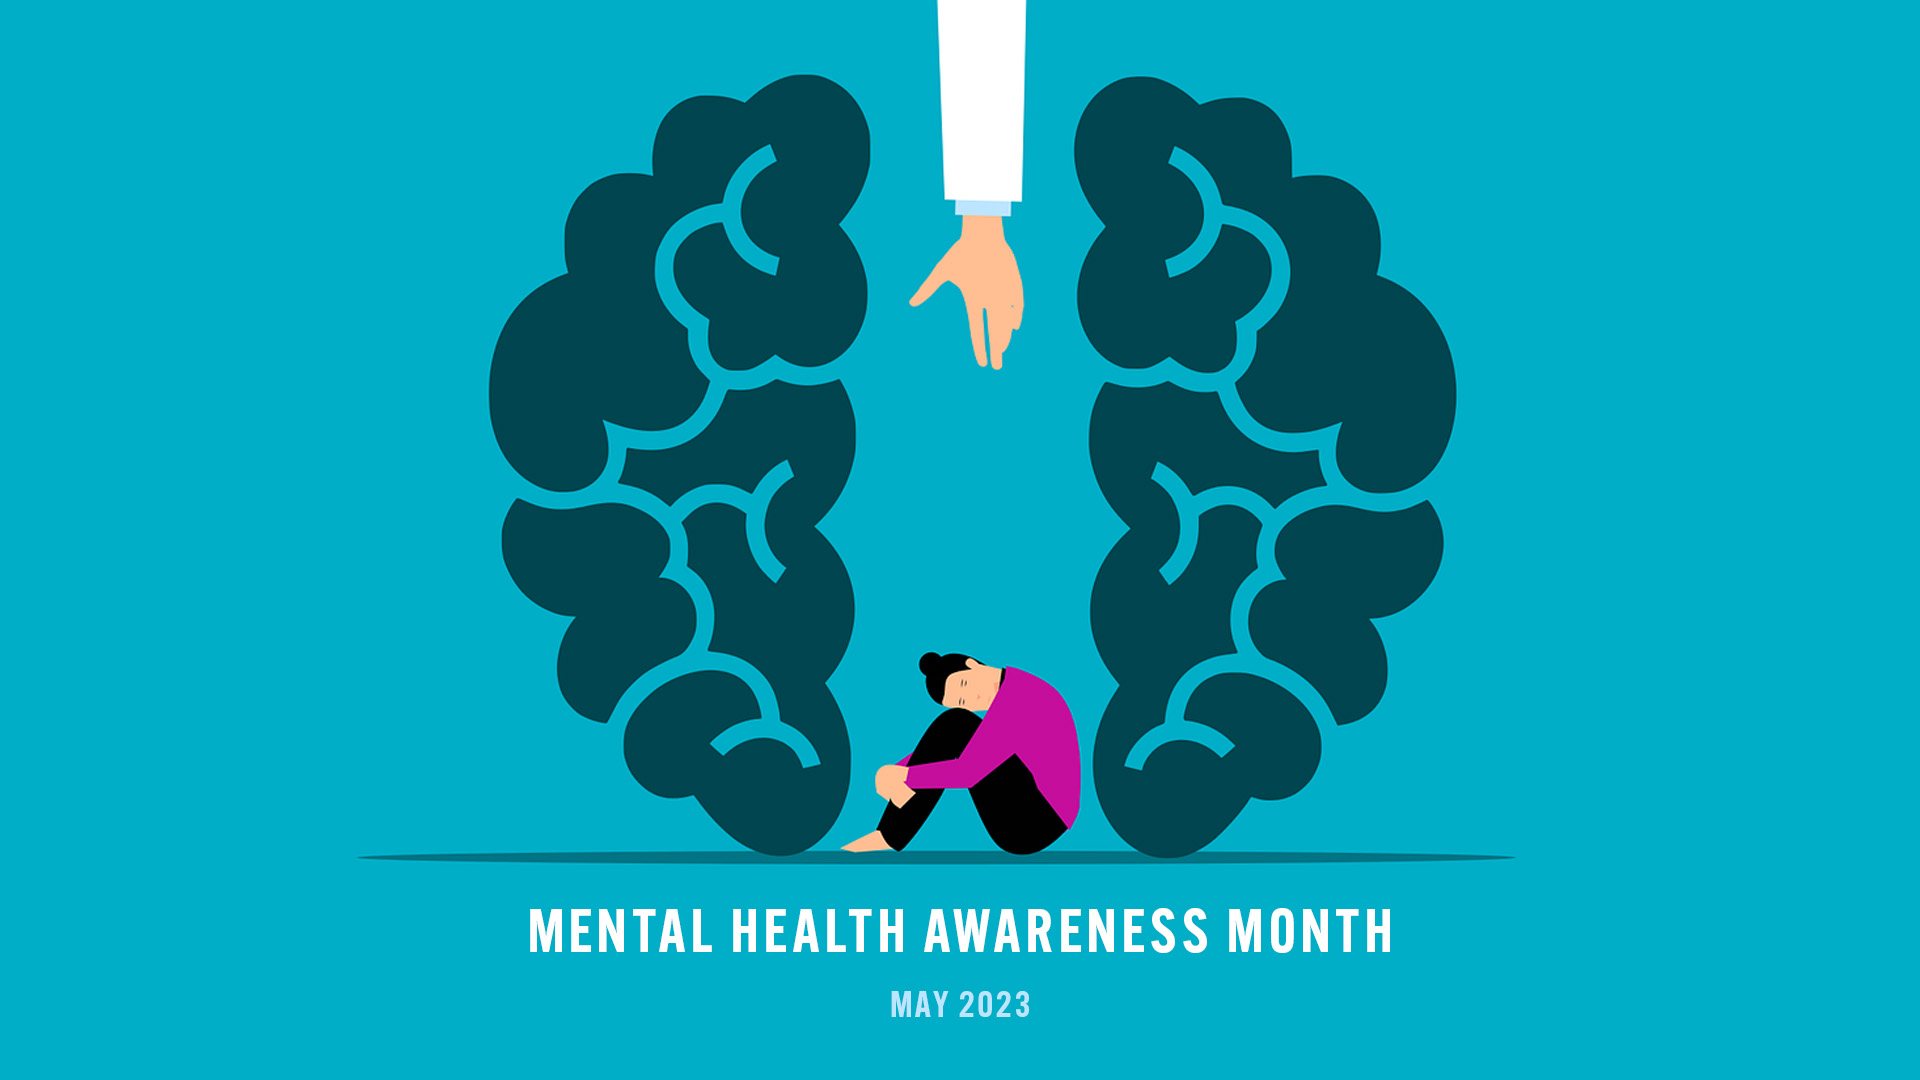 Blue background with a navy blue illustrated prain split down the middle with a hand reaching down from the top of the graphic. Below the hand there is a person sitting on the ground with their arms wrapped around their legs and their head resting on their knees. Mental Health awareness month May 2023 is written across the bottom of the image in white text